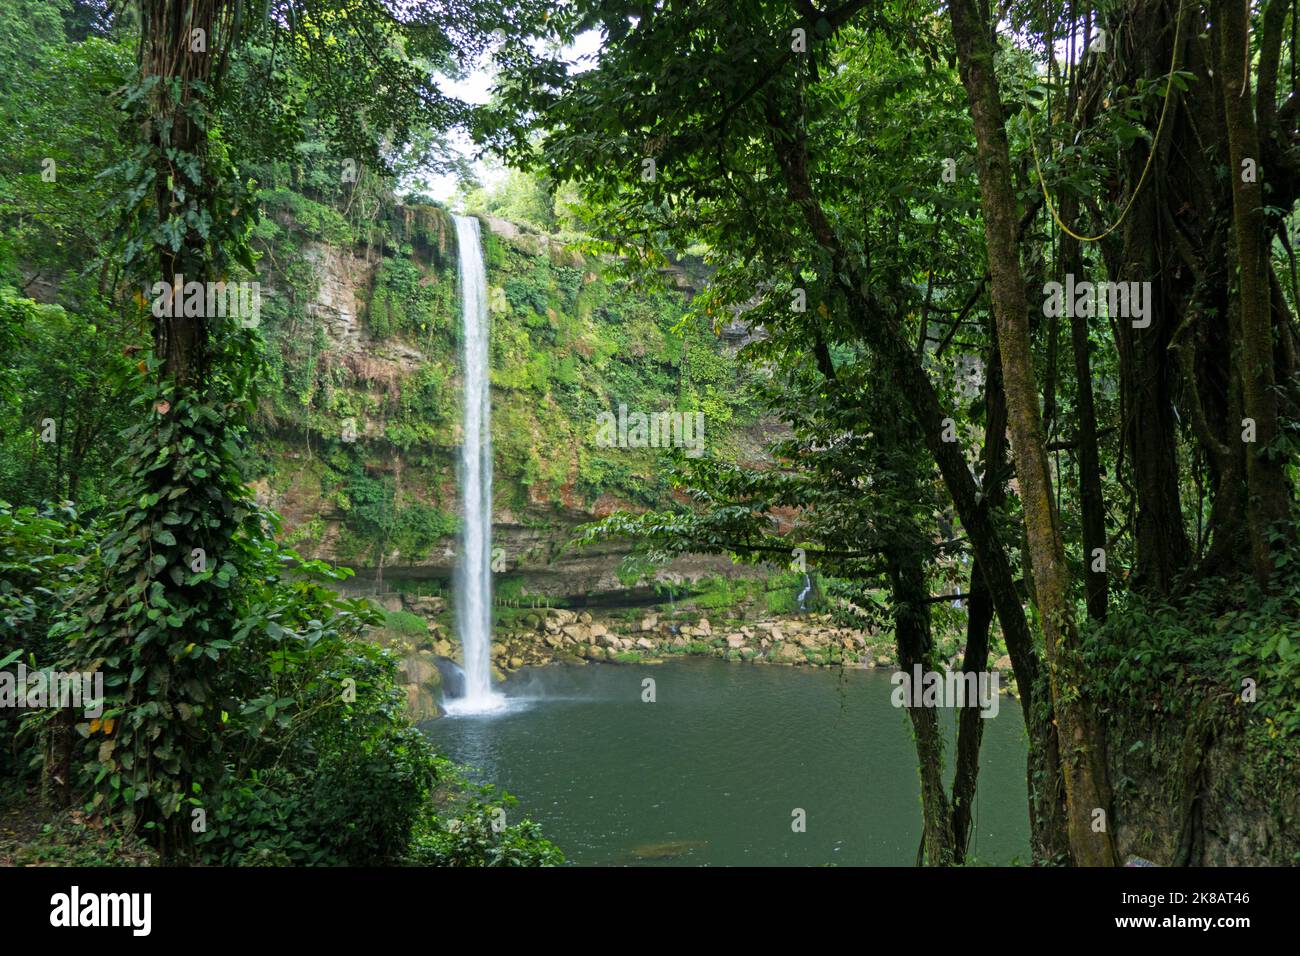 View of Misol Ha waterfall in Chiapas, Mexico. Beautiful Mexican natural landscape with water fall and jungle Stock Photo